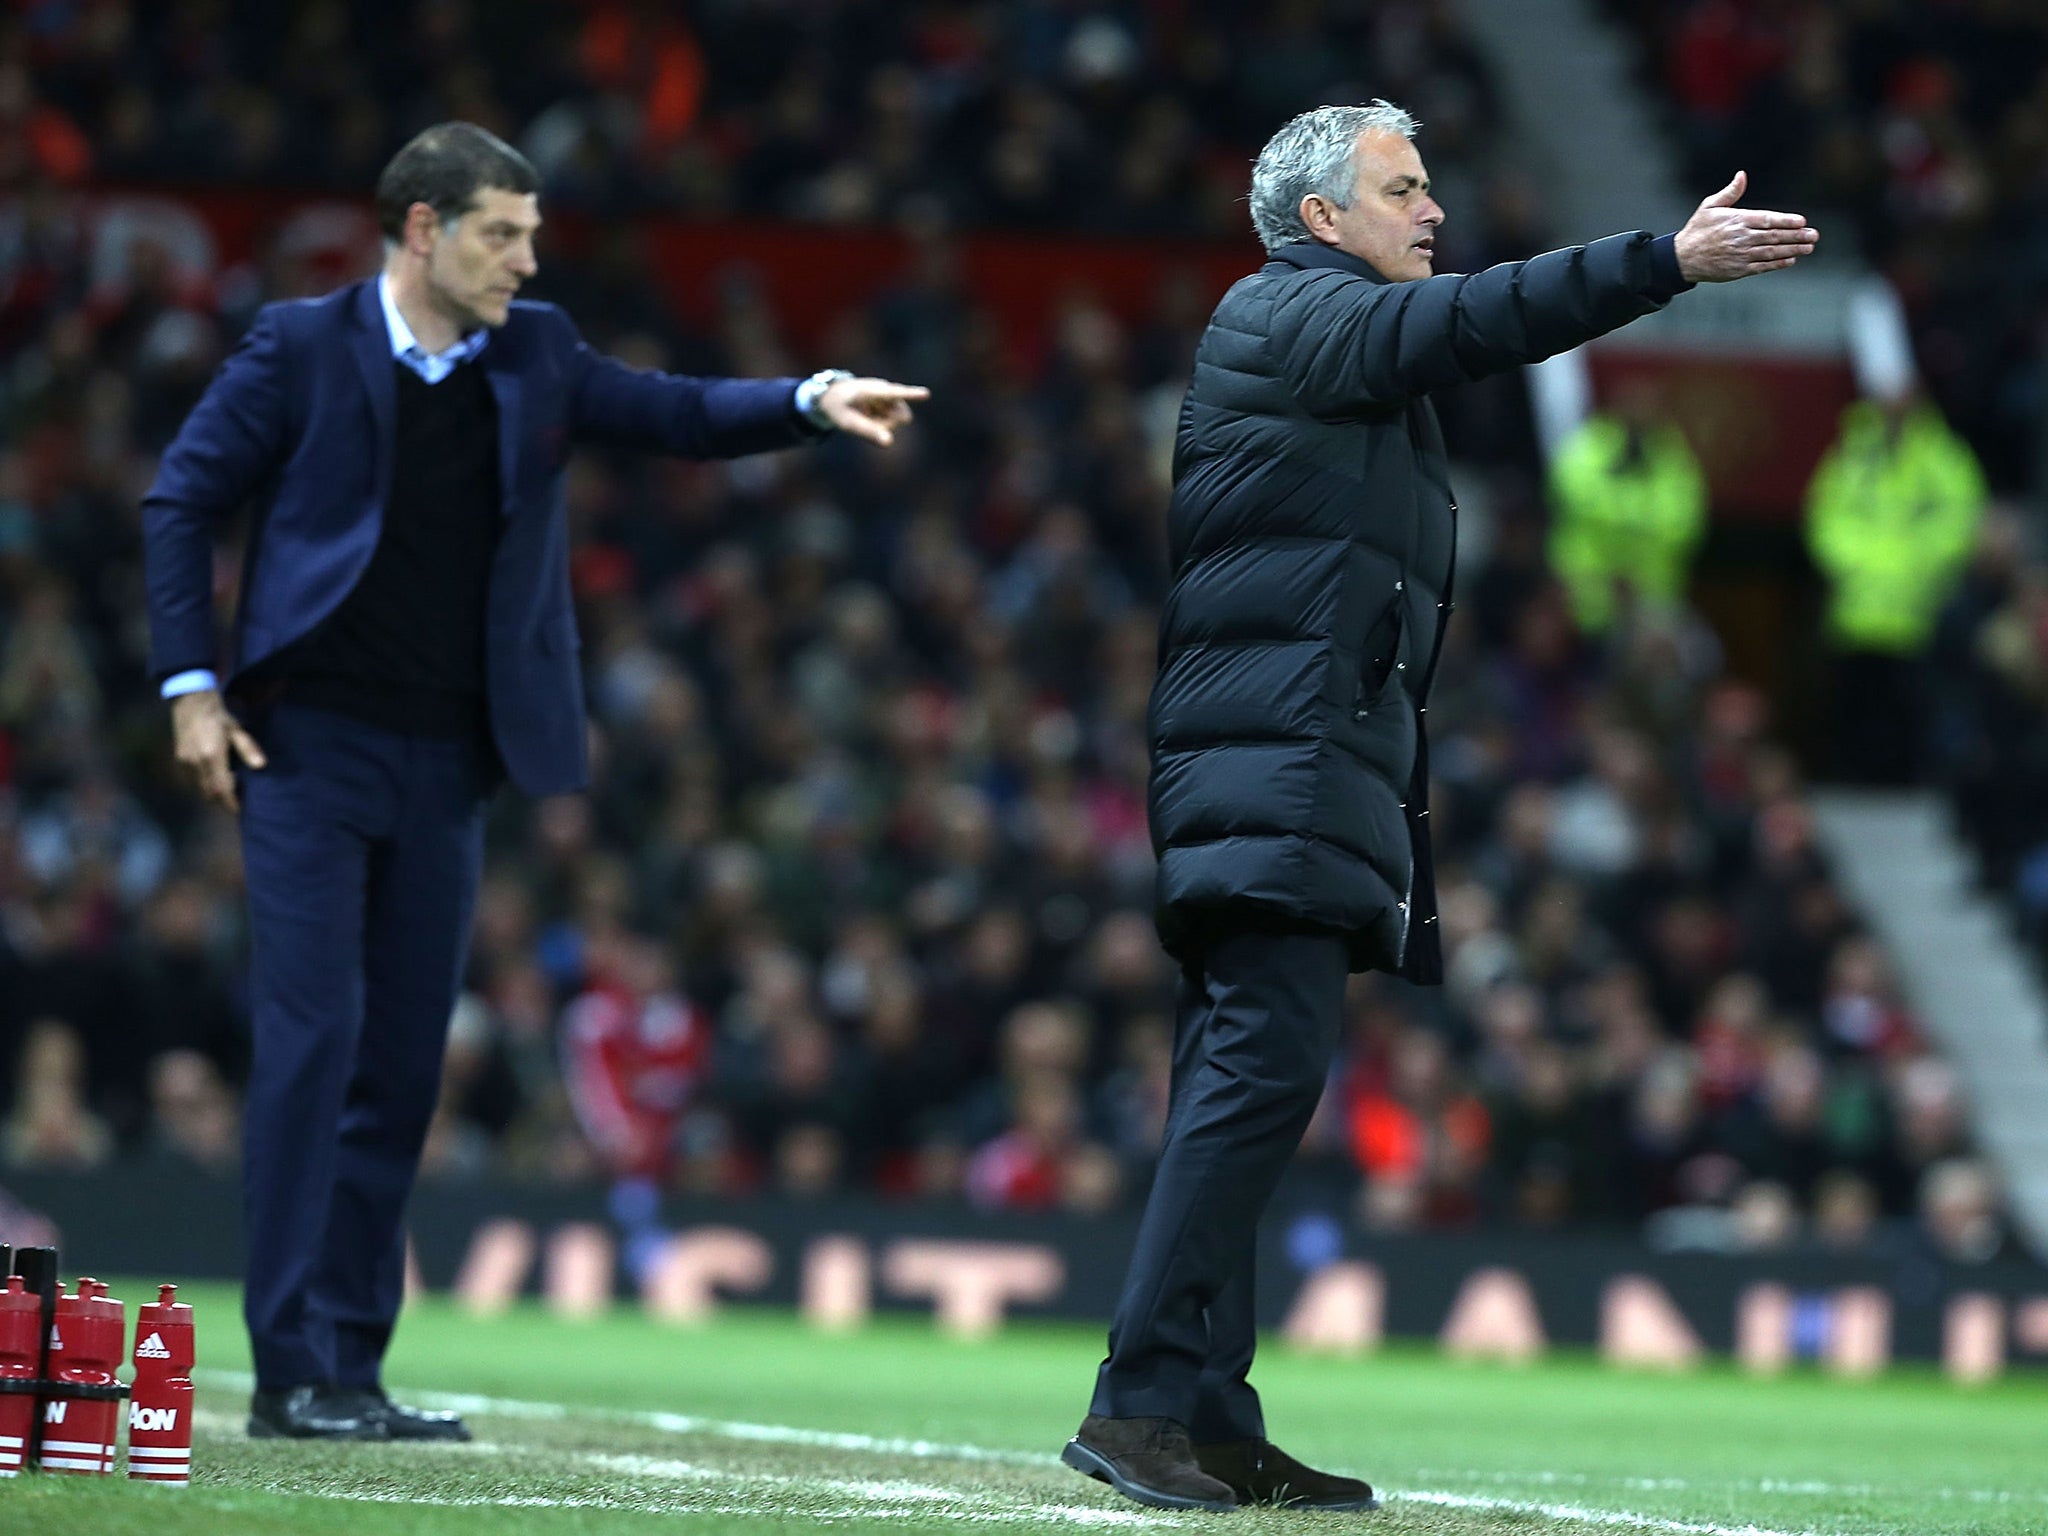 Slaven Bilic and Jose Mourinho have already met each other twice this season